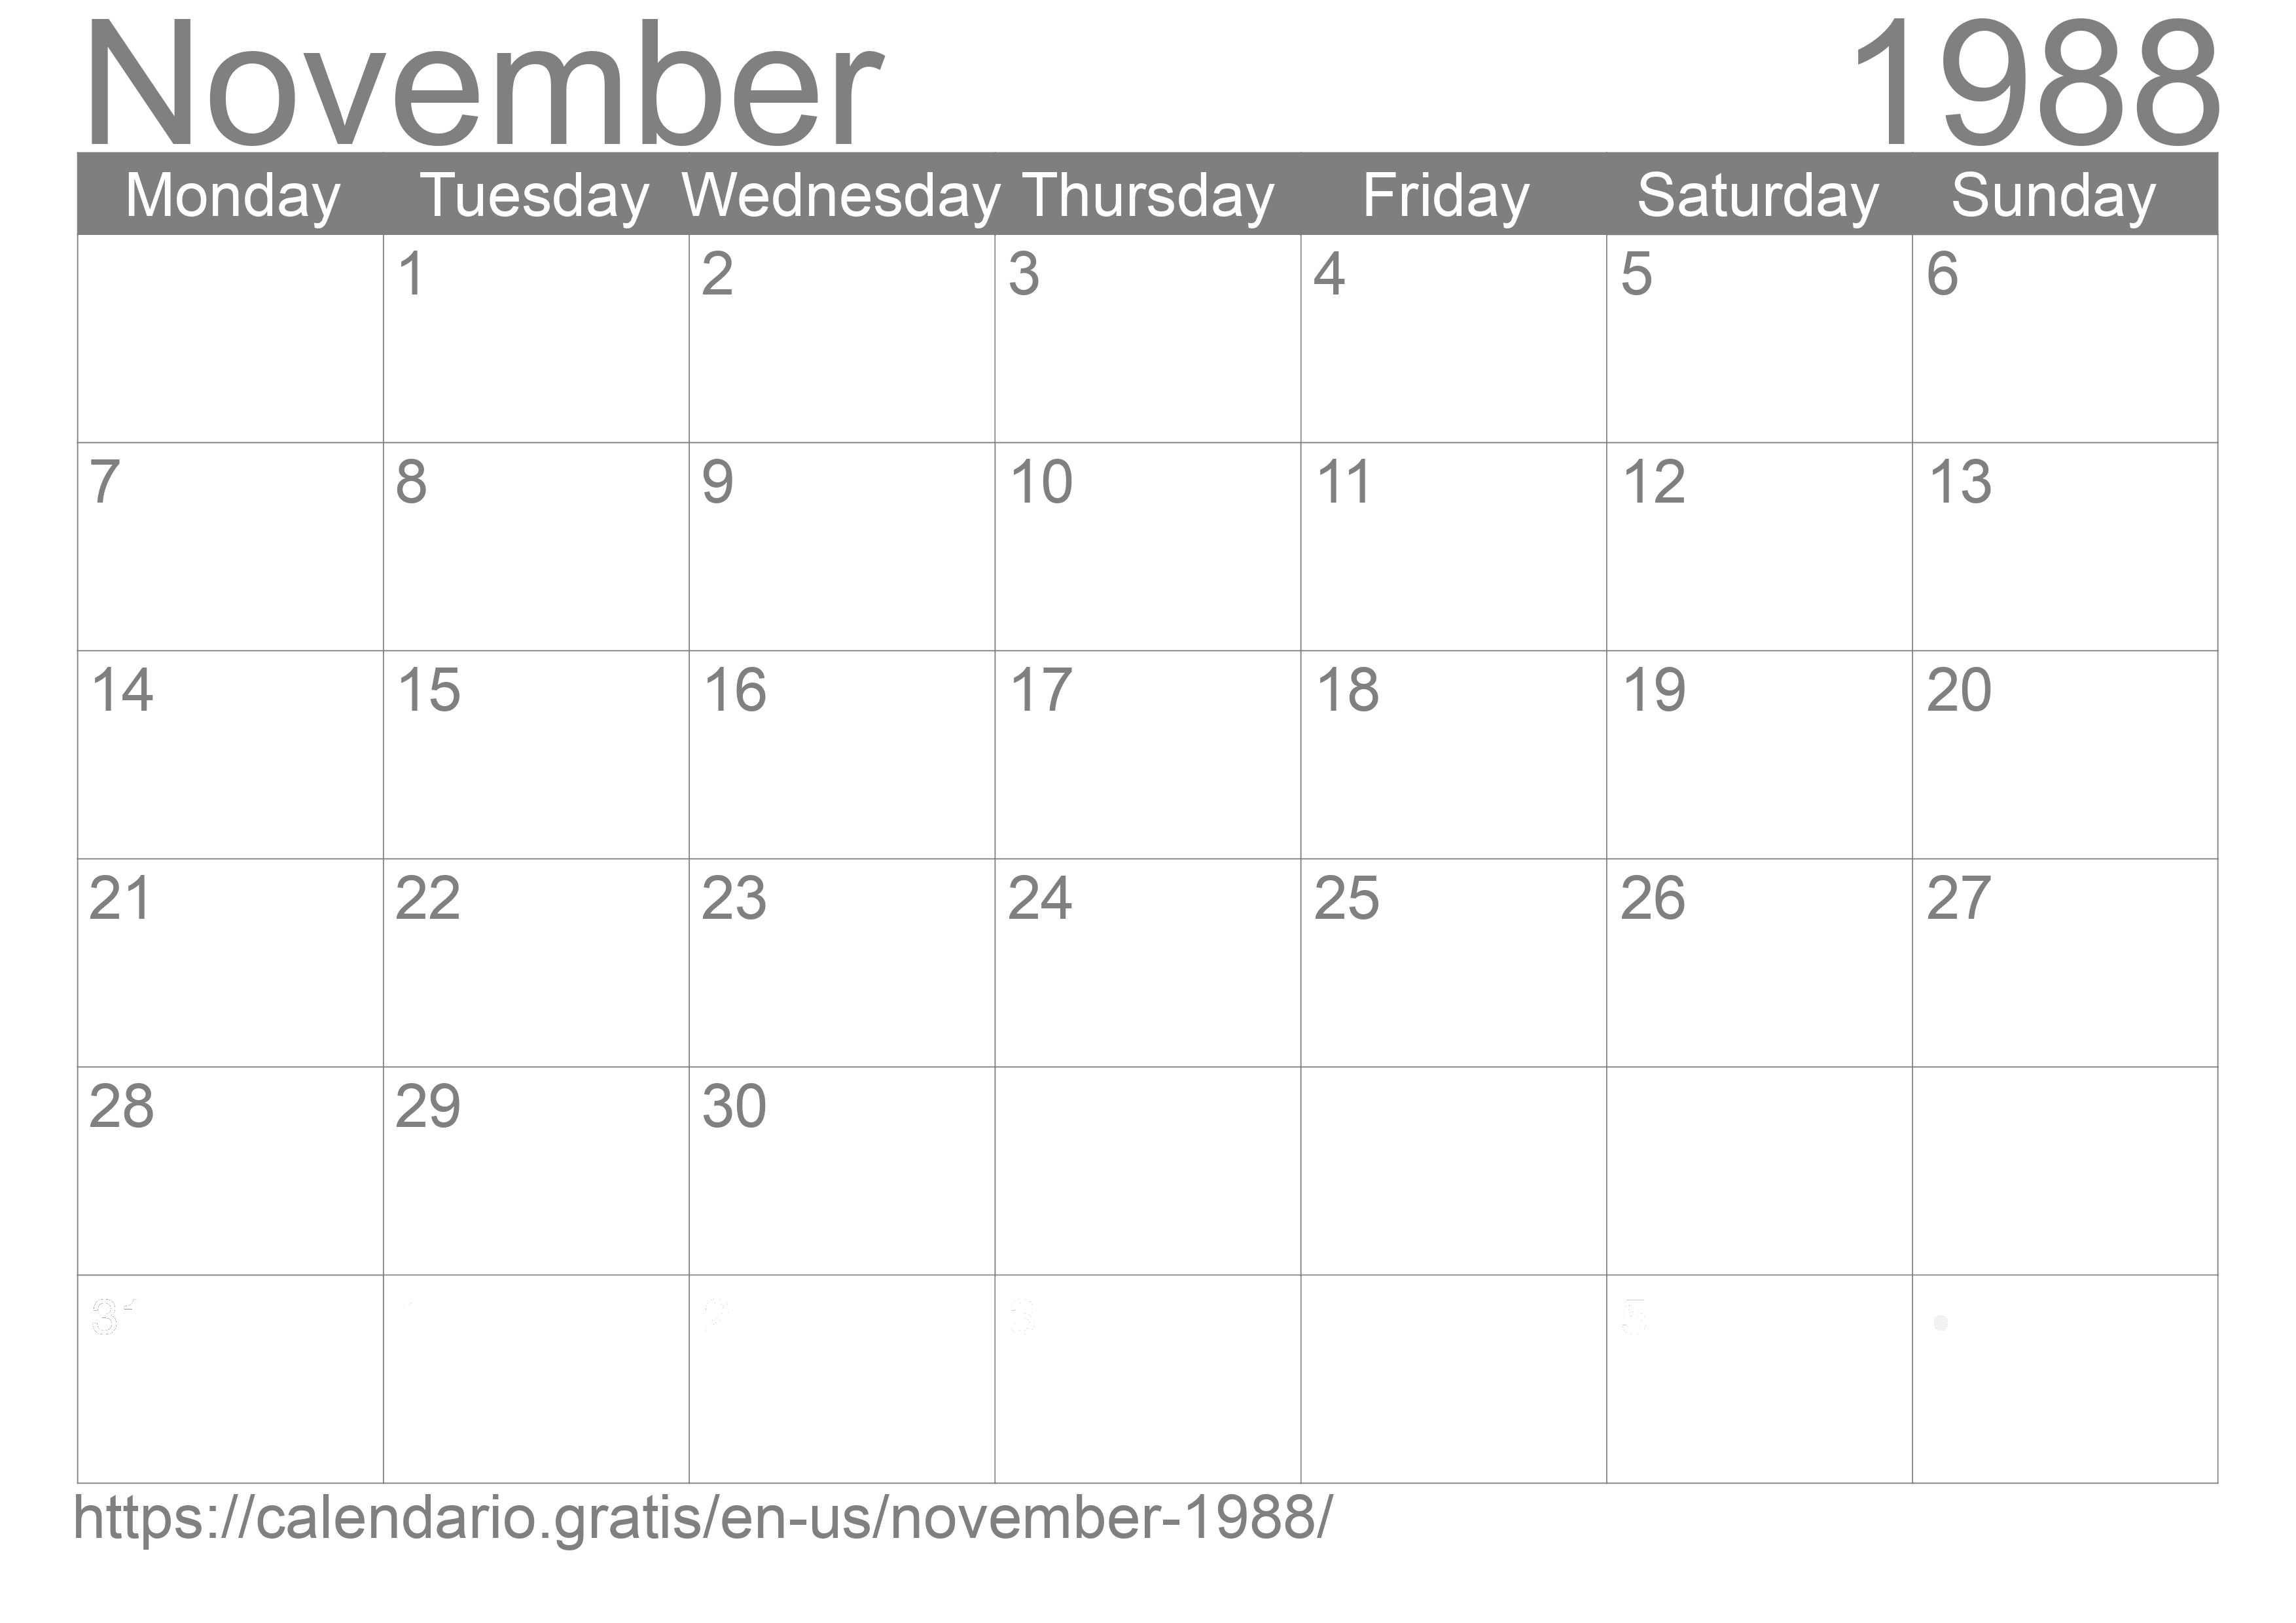 Calendar November 1988 from United States of America in English ☑️